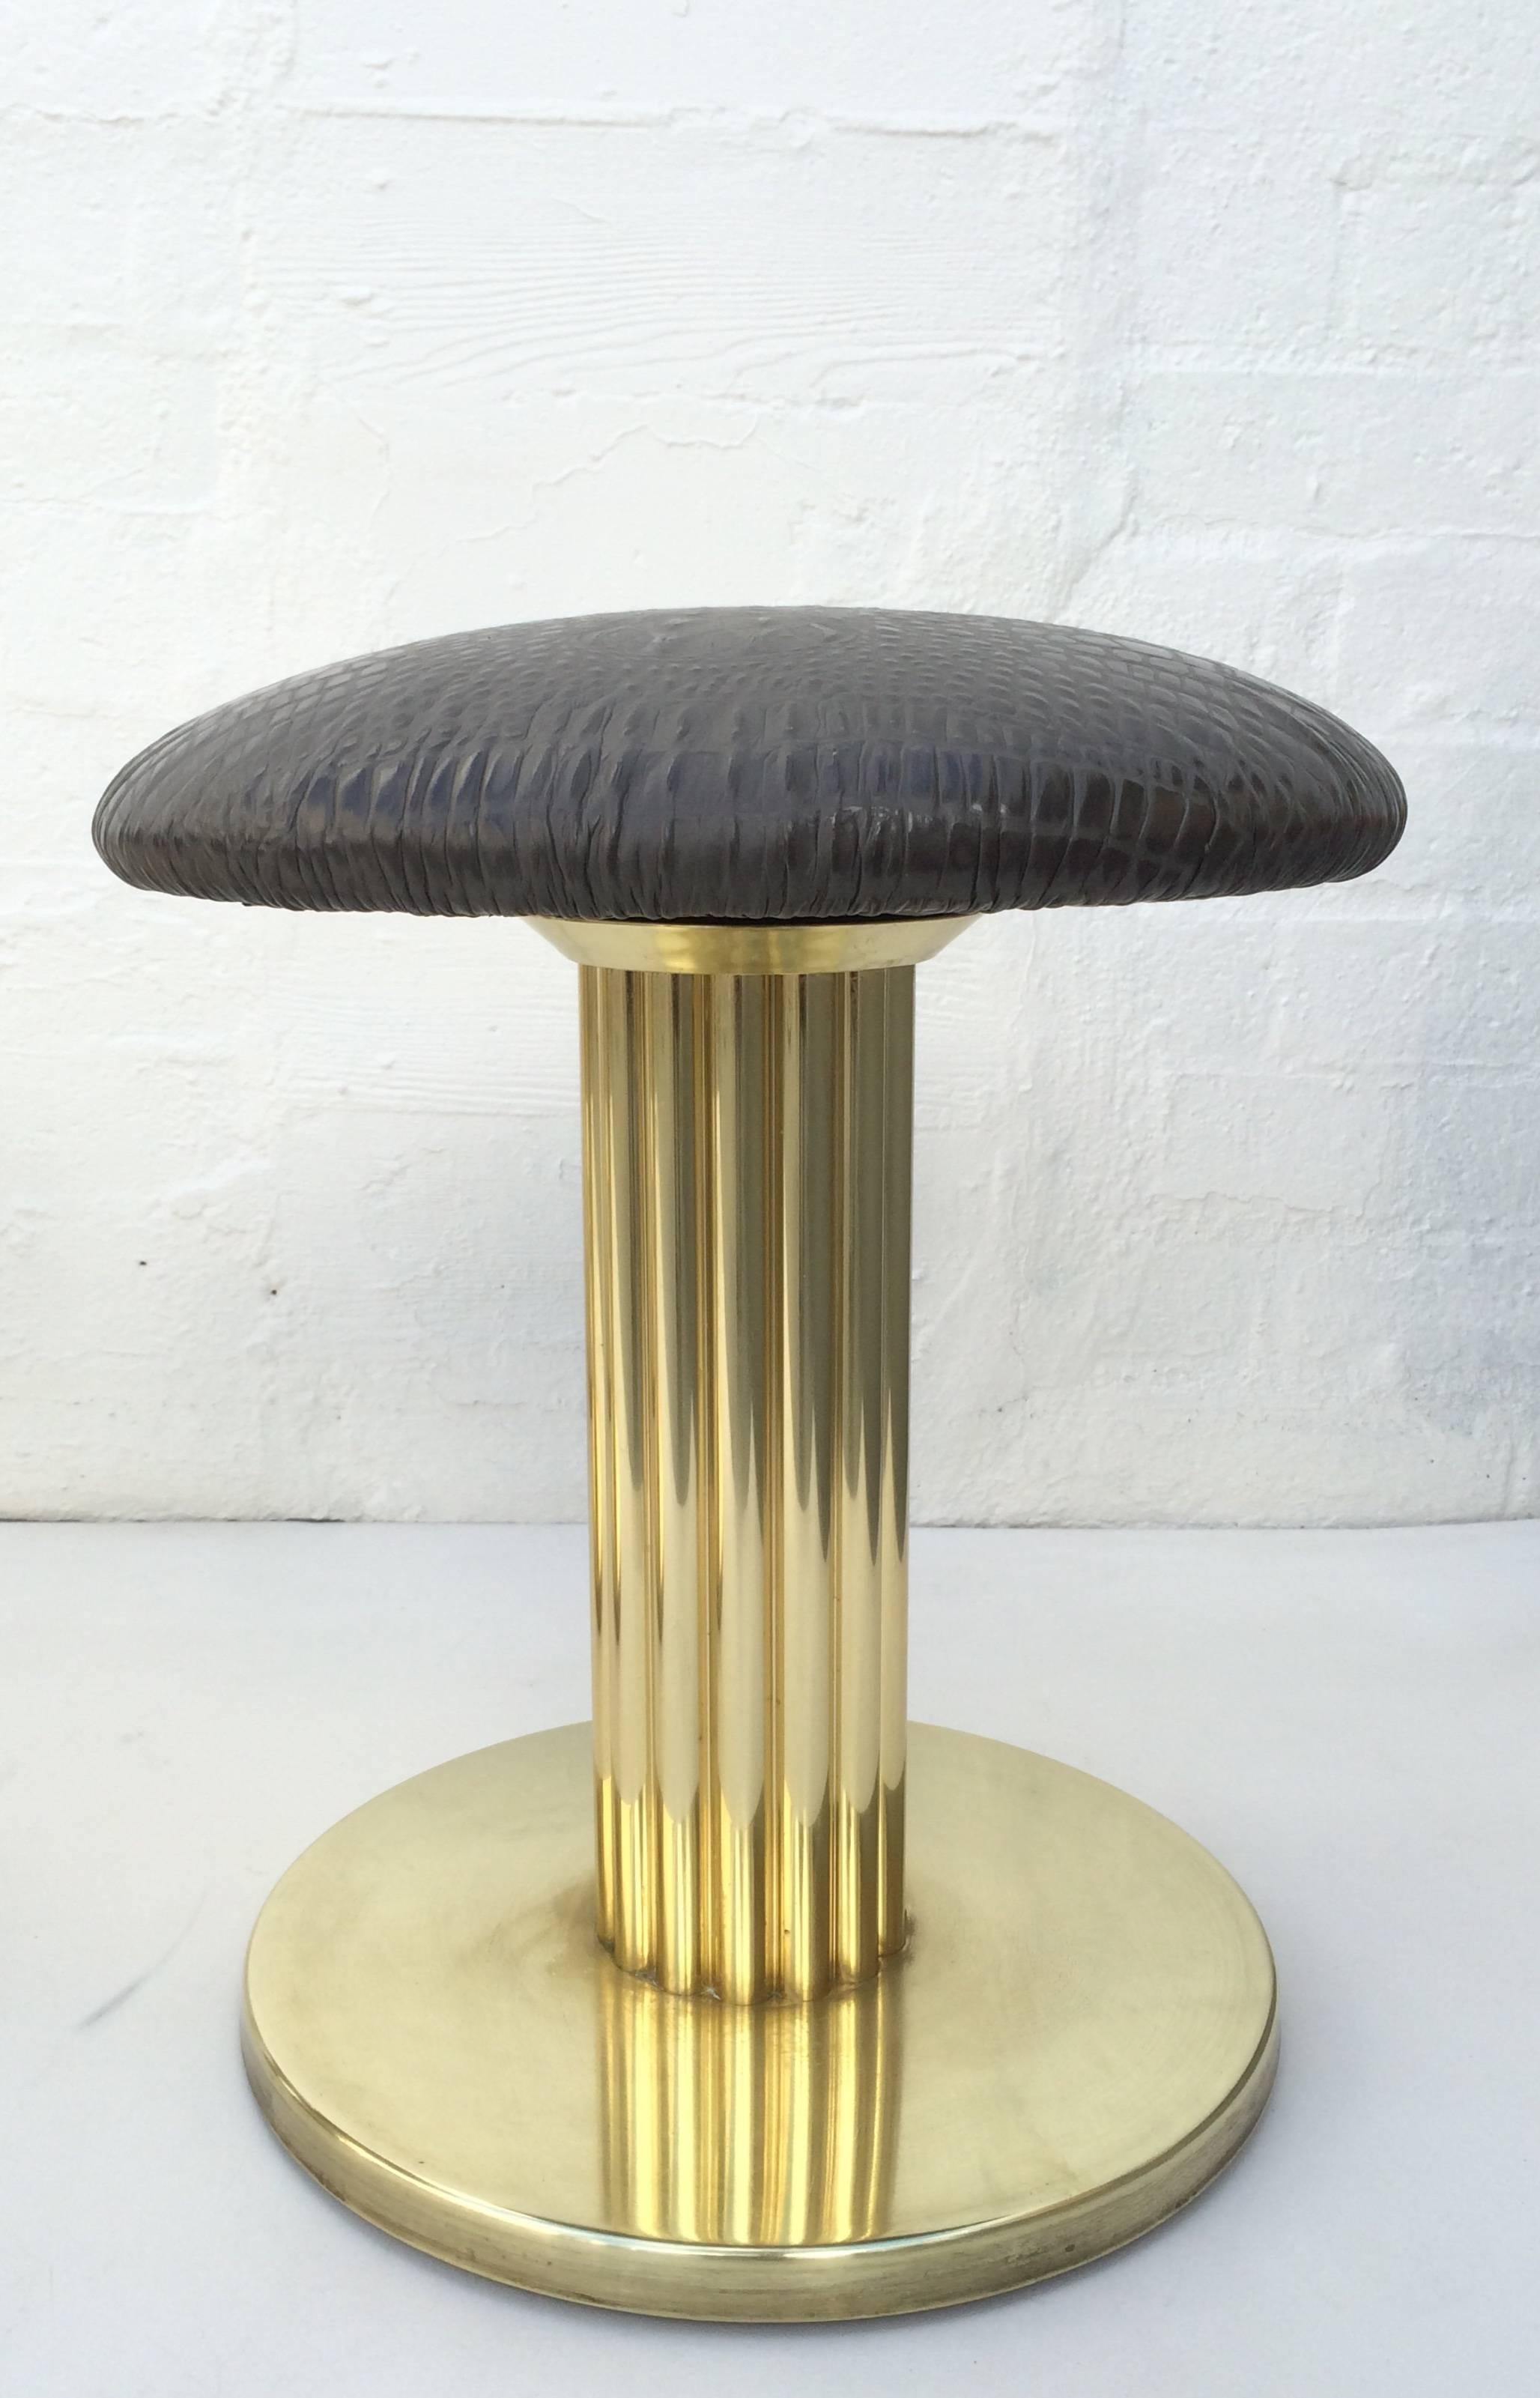 Embossed Brass and Leather Swivel Stools by Design for Leisure Ltd